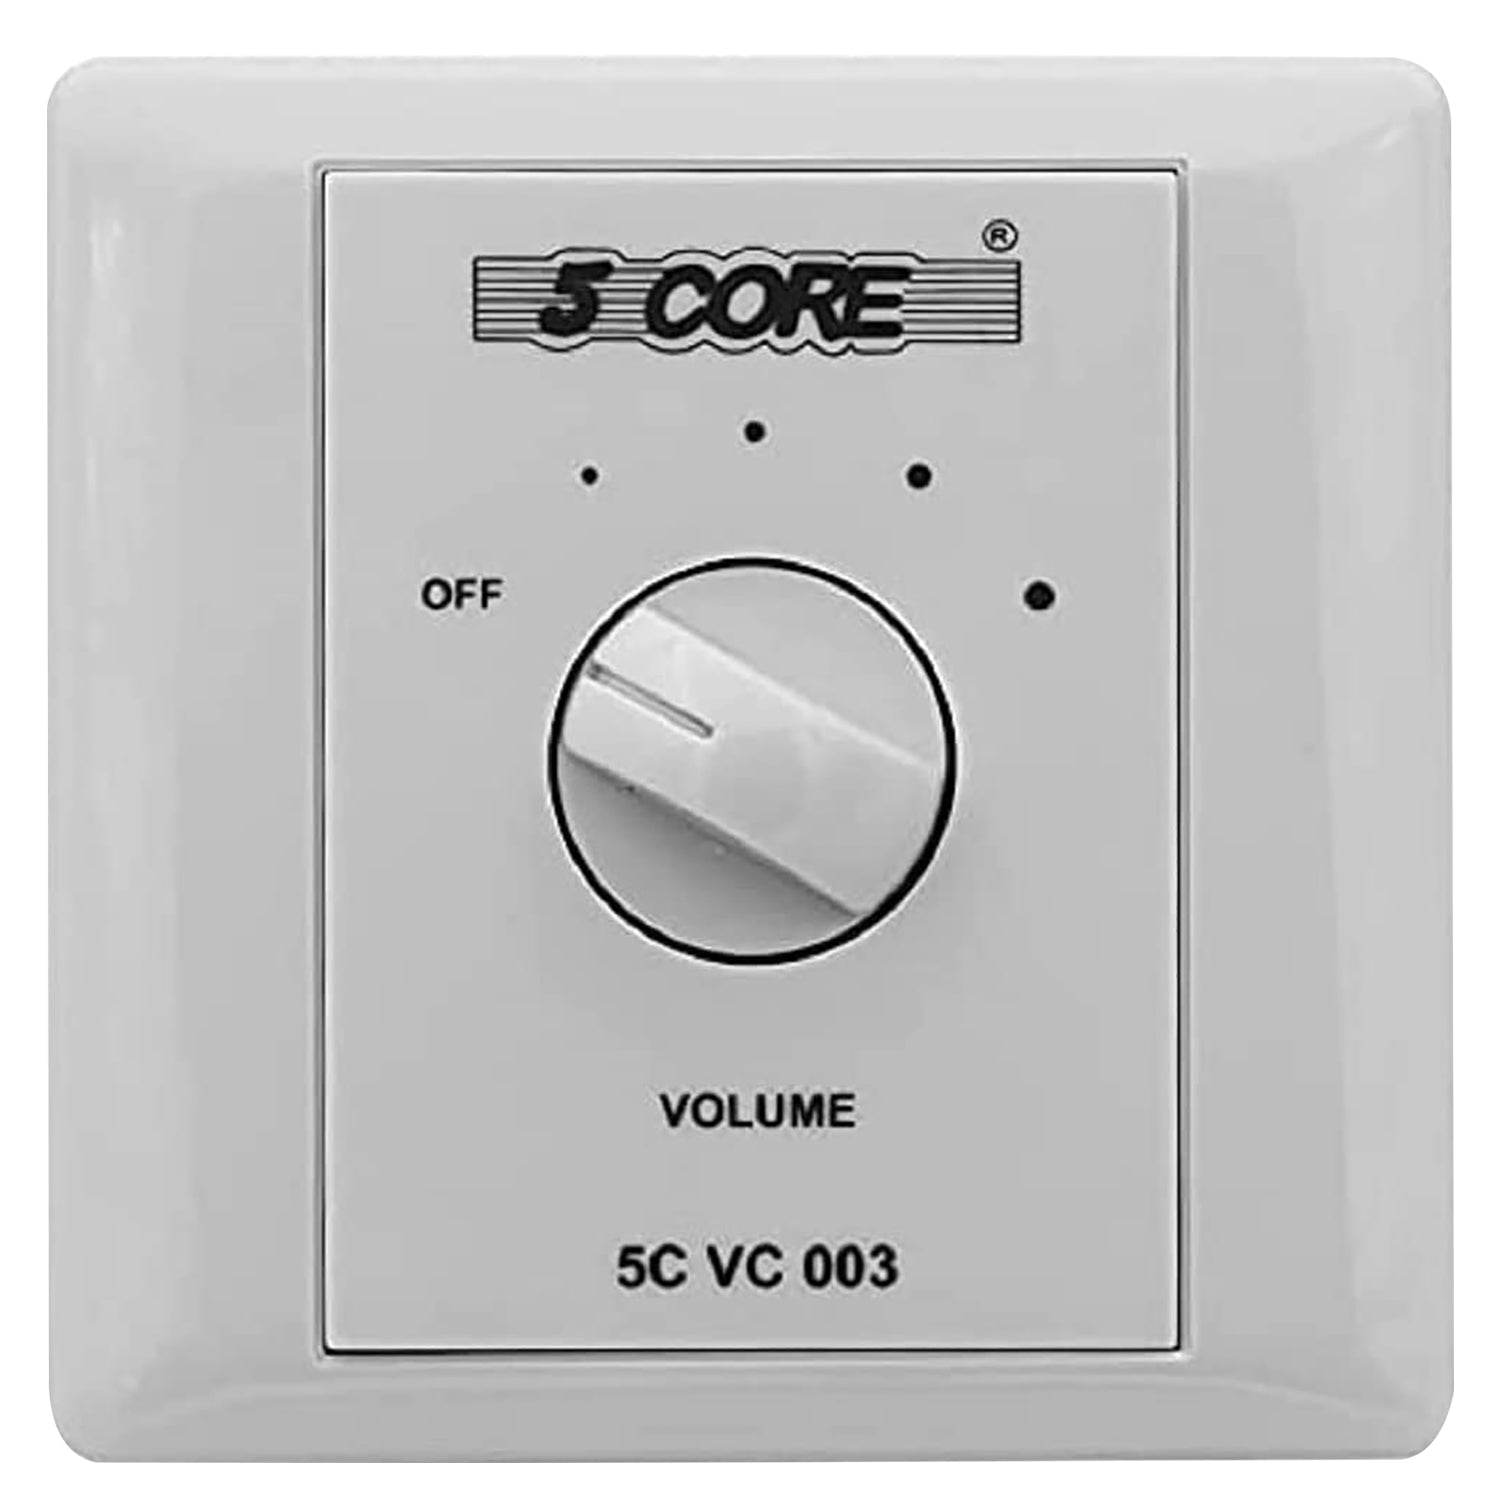 5 Core Wall Mount Volume Control Knob 30W In-Wall Plate Rotary Style Volume Adjustment for Speakers